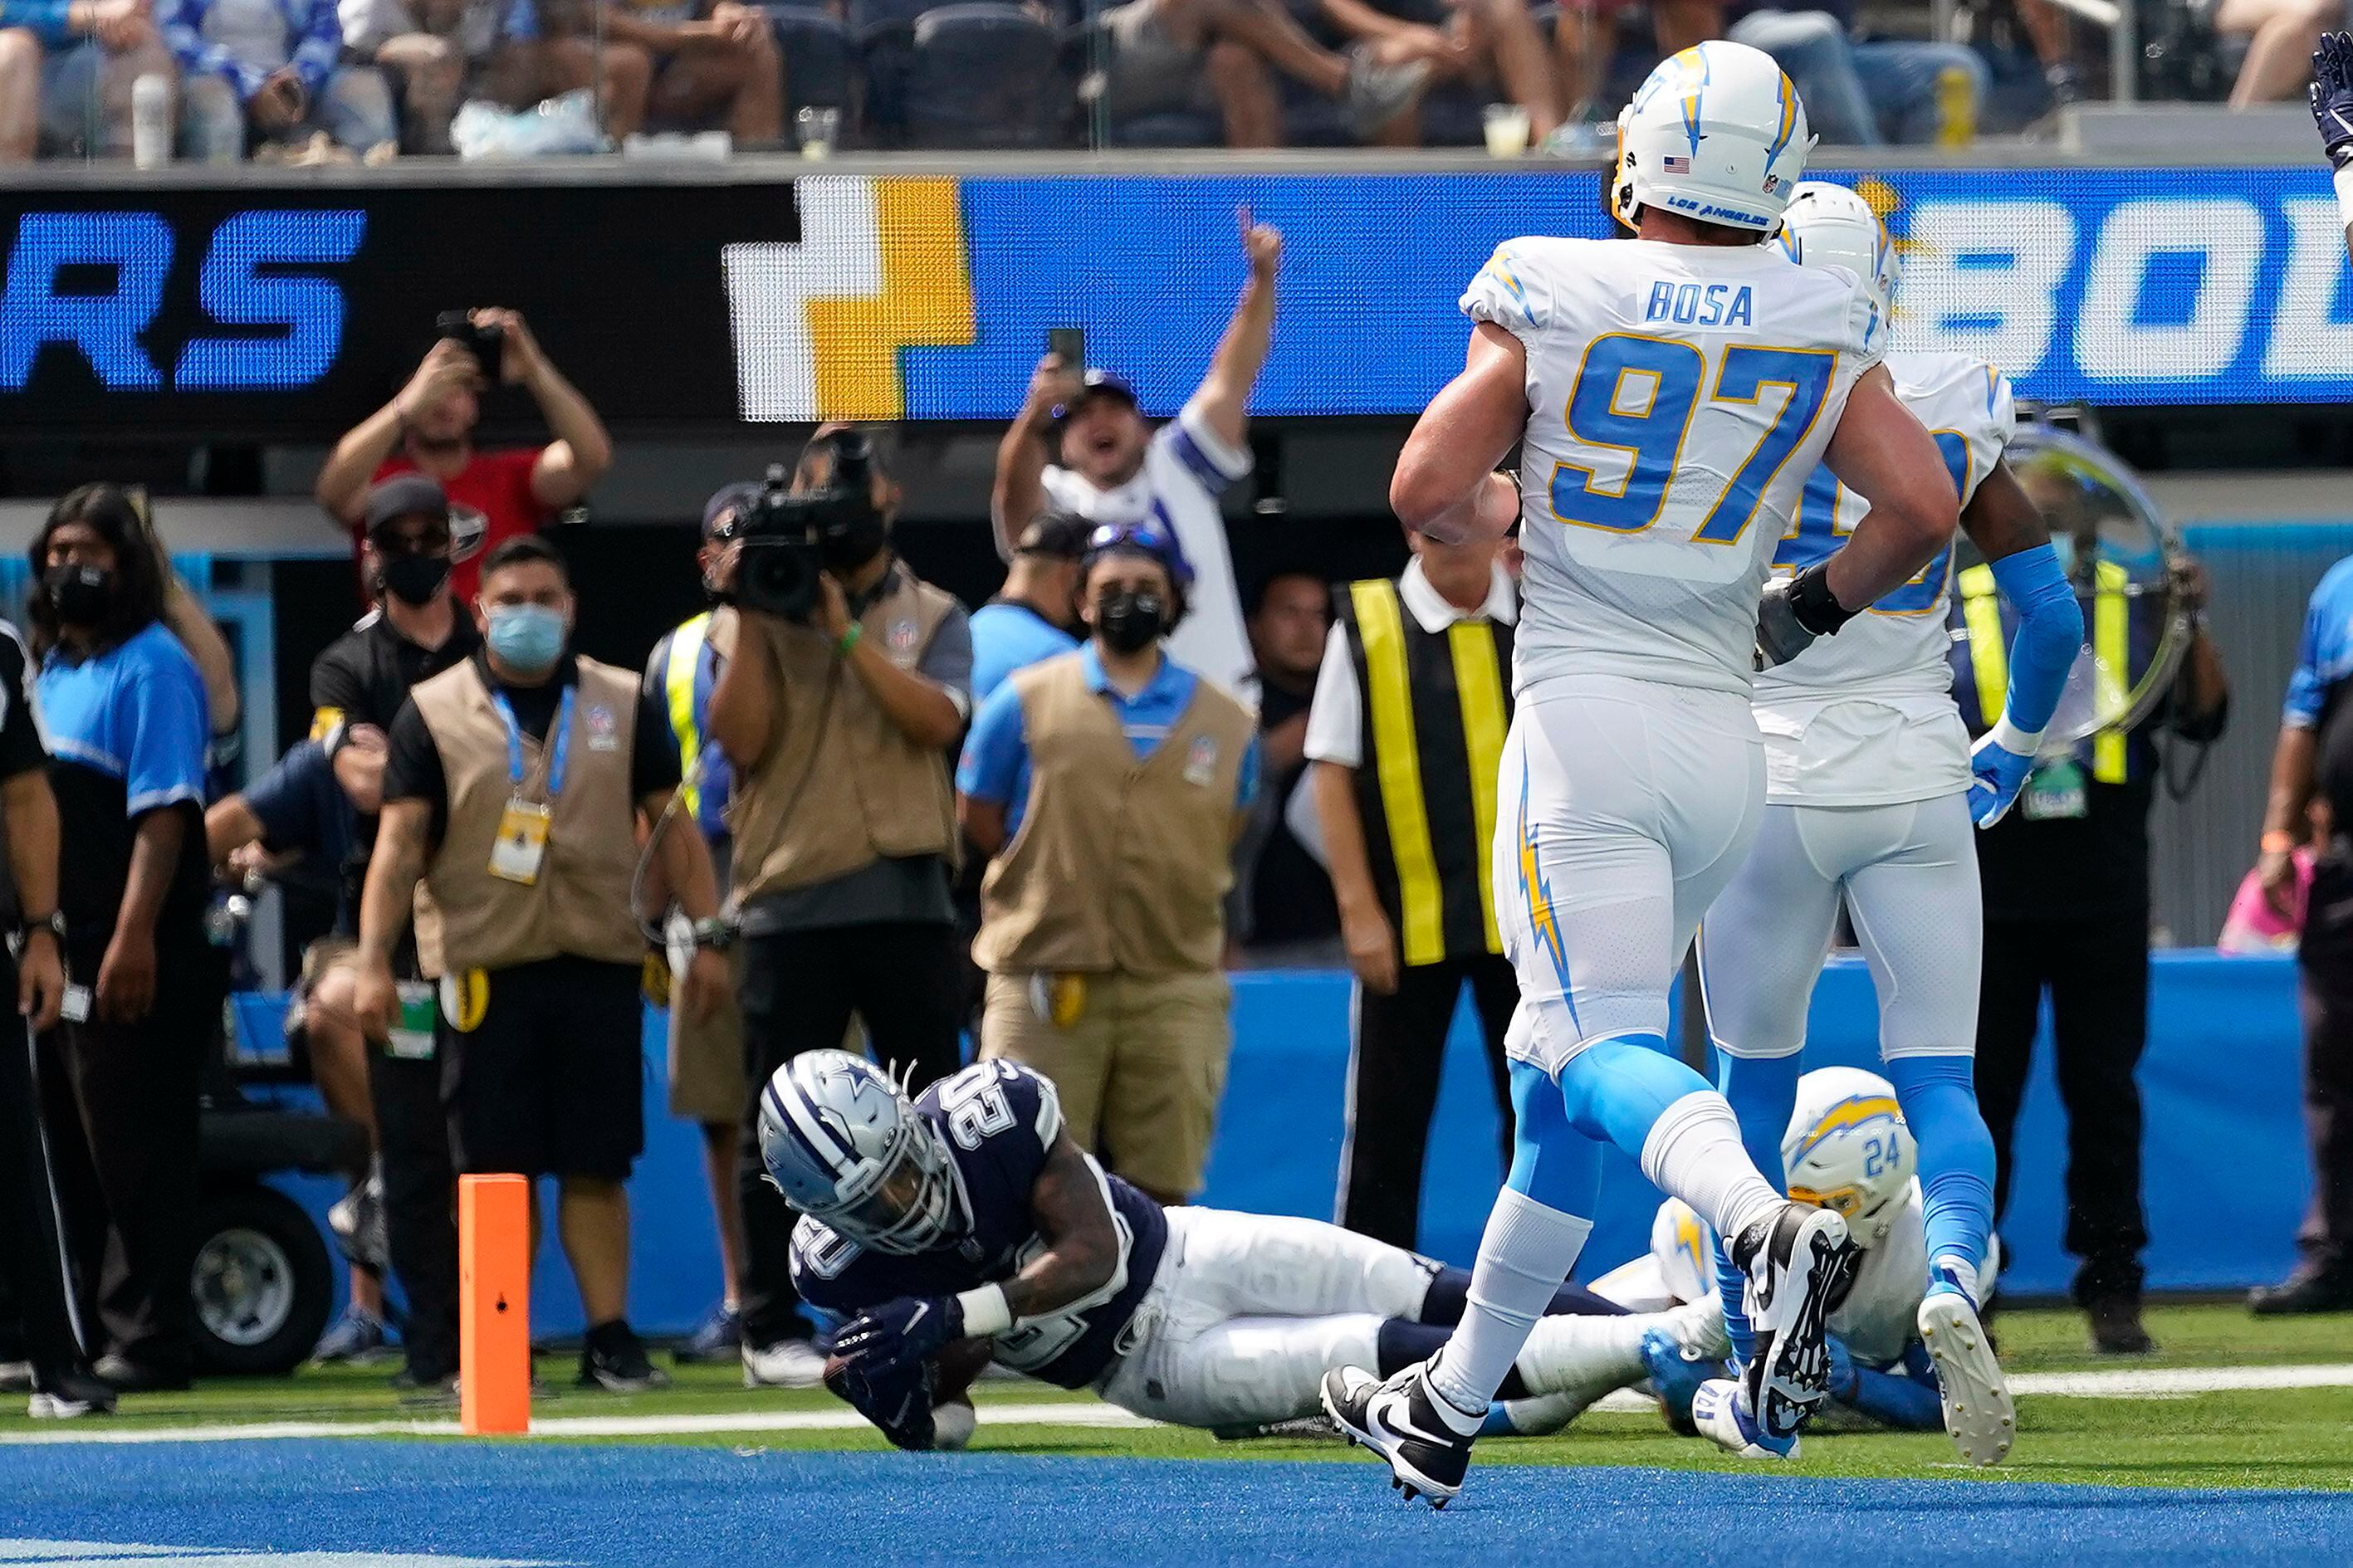 Dallas Cowboys 20-17 Los Angeles Chargers: Greg Zuerlein kicks game-winning  field goal as time expires, NFL News